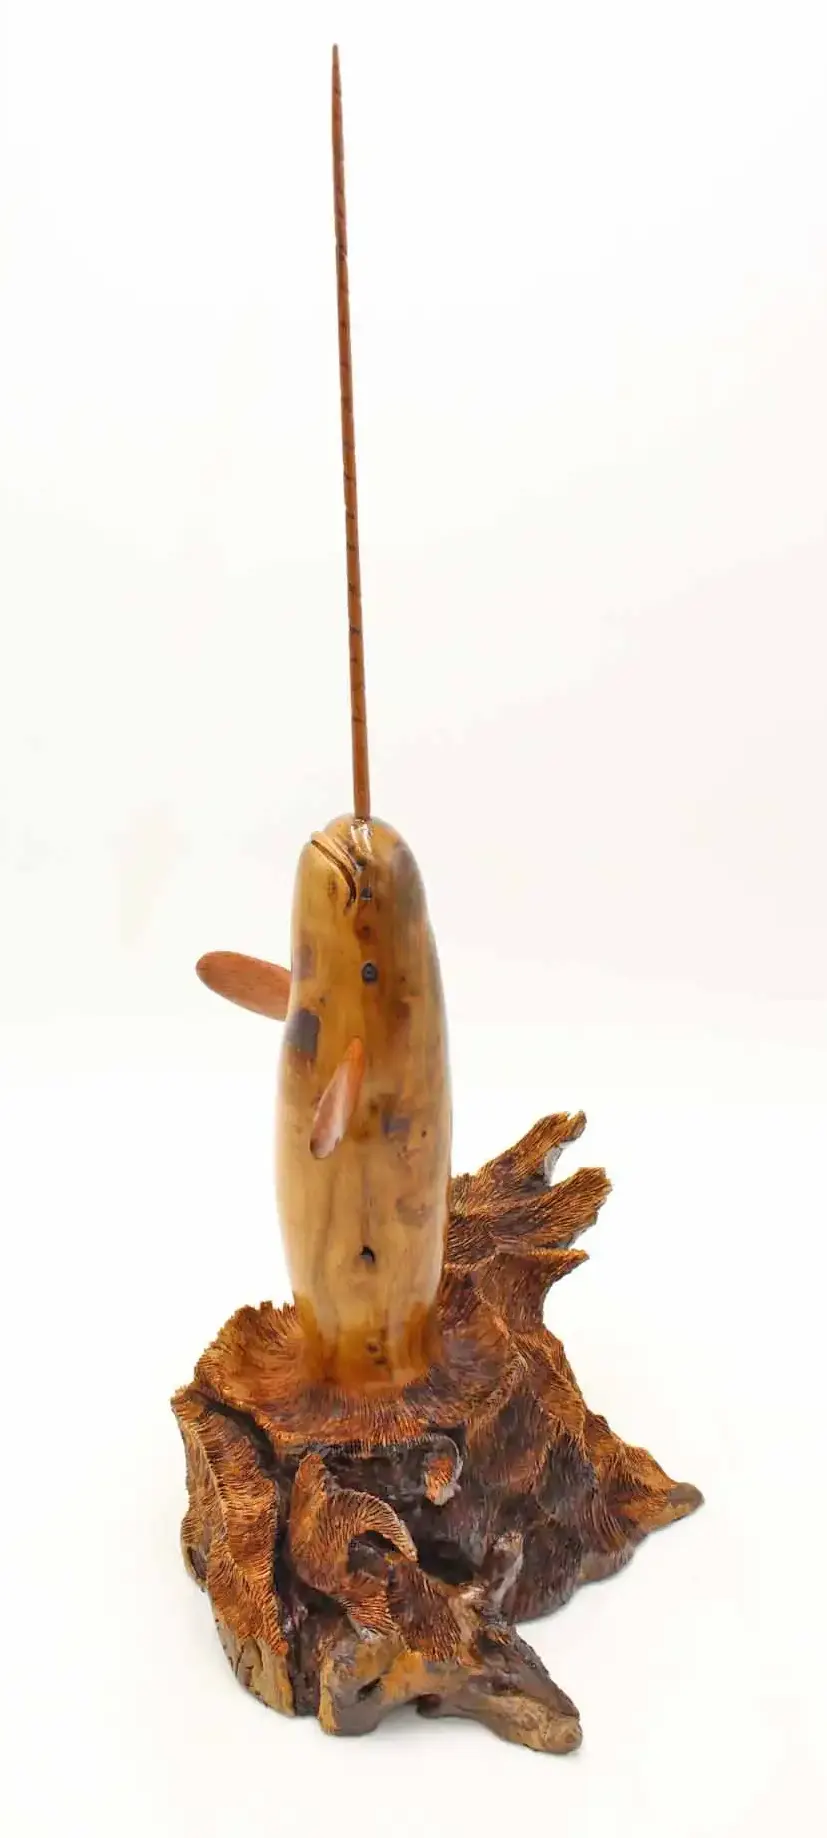 Narwhal woodcarving sculpture